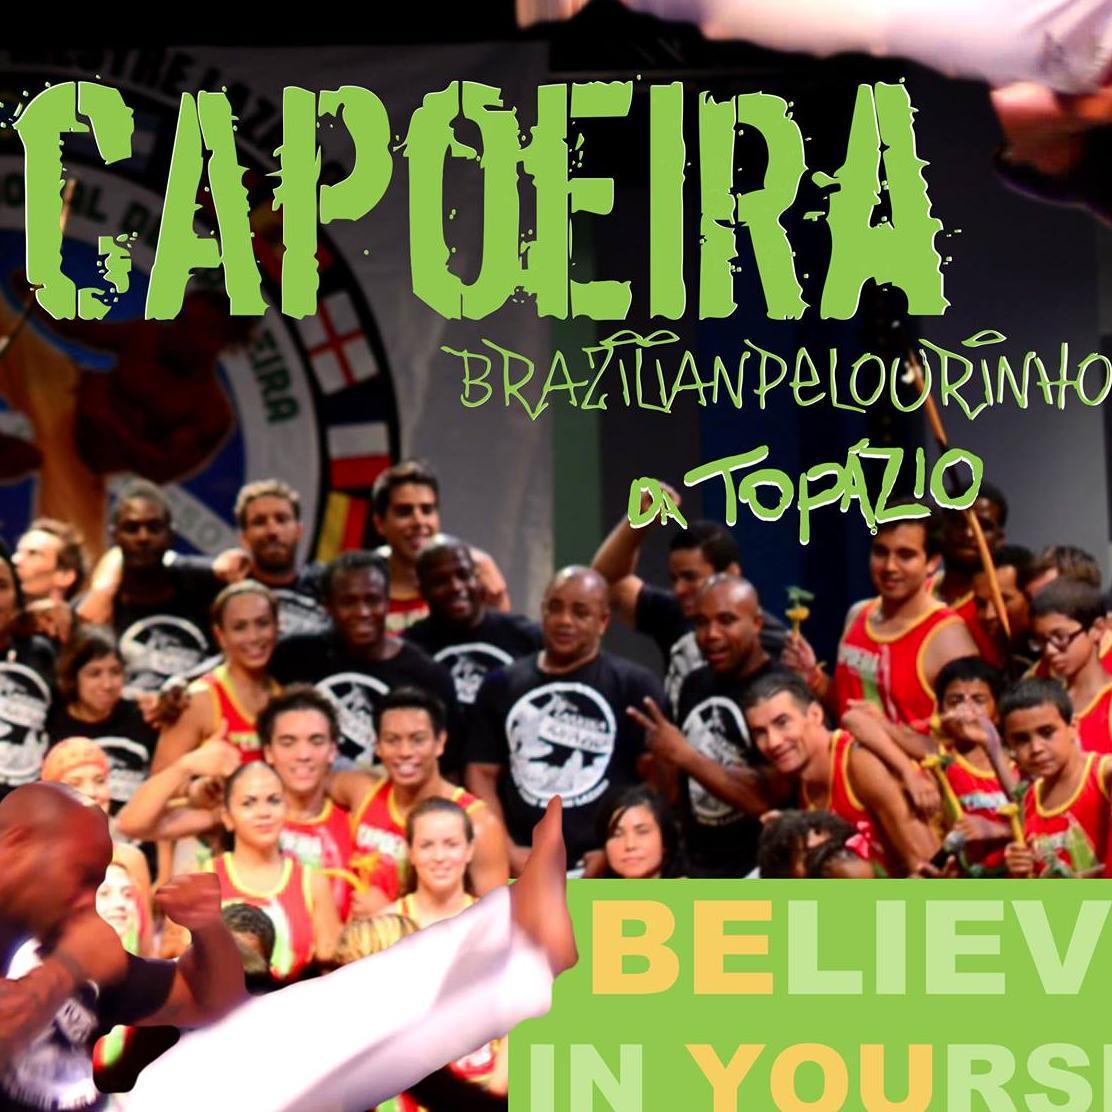 We are the premier Capoeira martial arts academy in Orlando, Florida. We offer Capoeira classes specifically for kids, teens, adults, and the whole family!